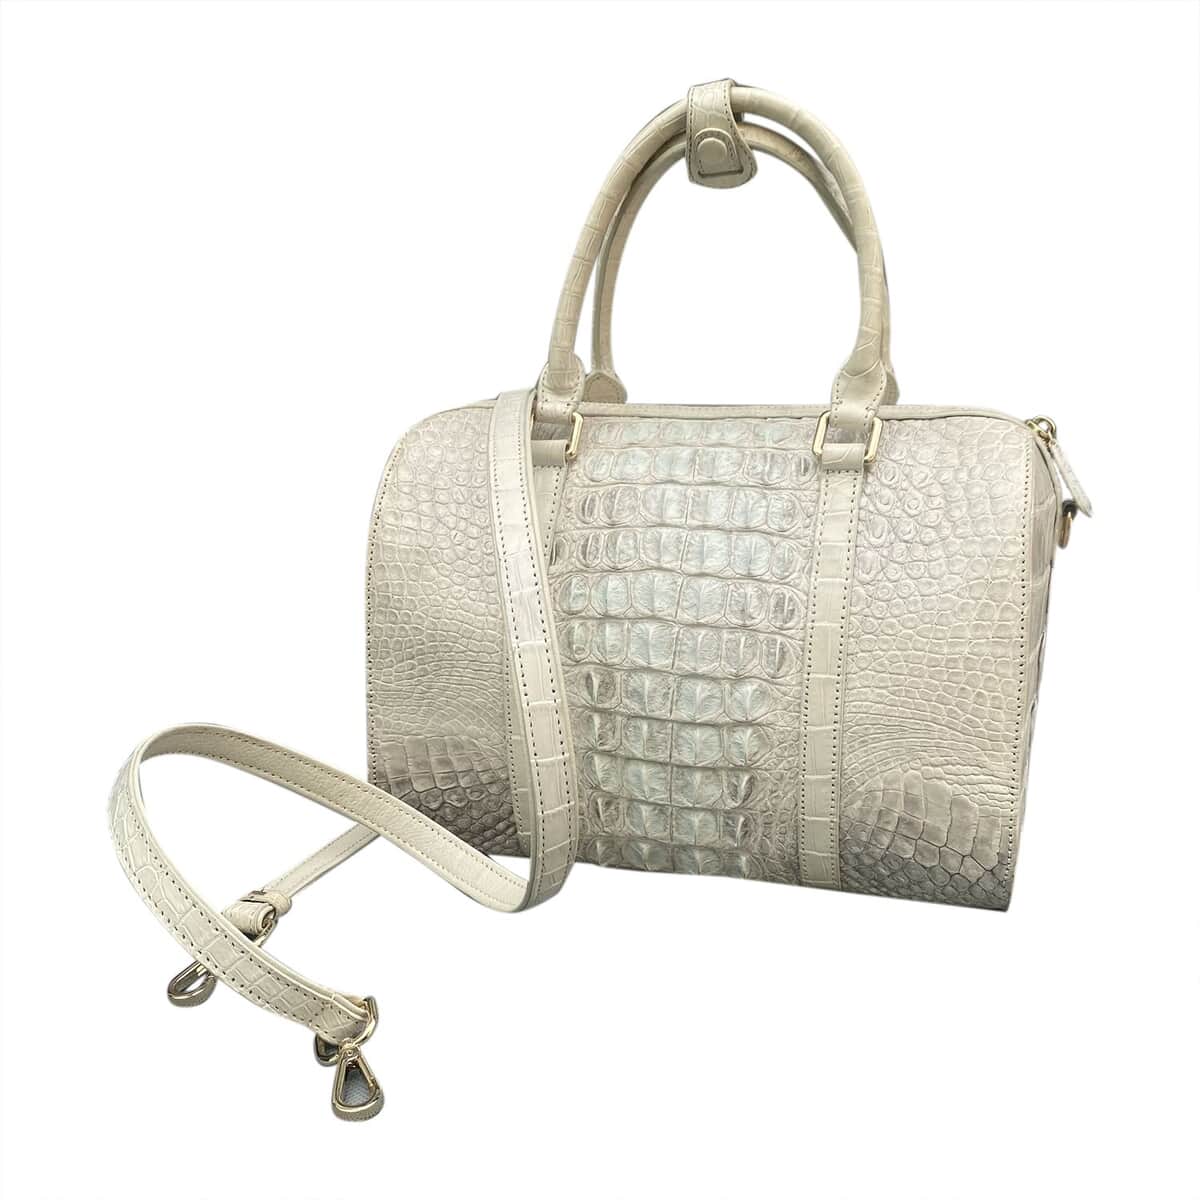 Grand Pelle Genuine Crocodile Leather Natural White Tote Bag (11.81"x5.9"x7.87") with Detachable Shoulder Strap image number 1